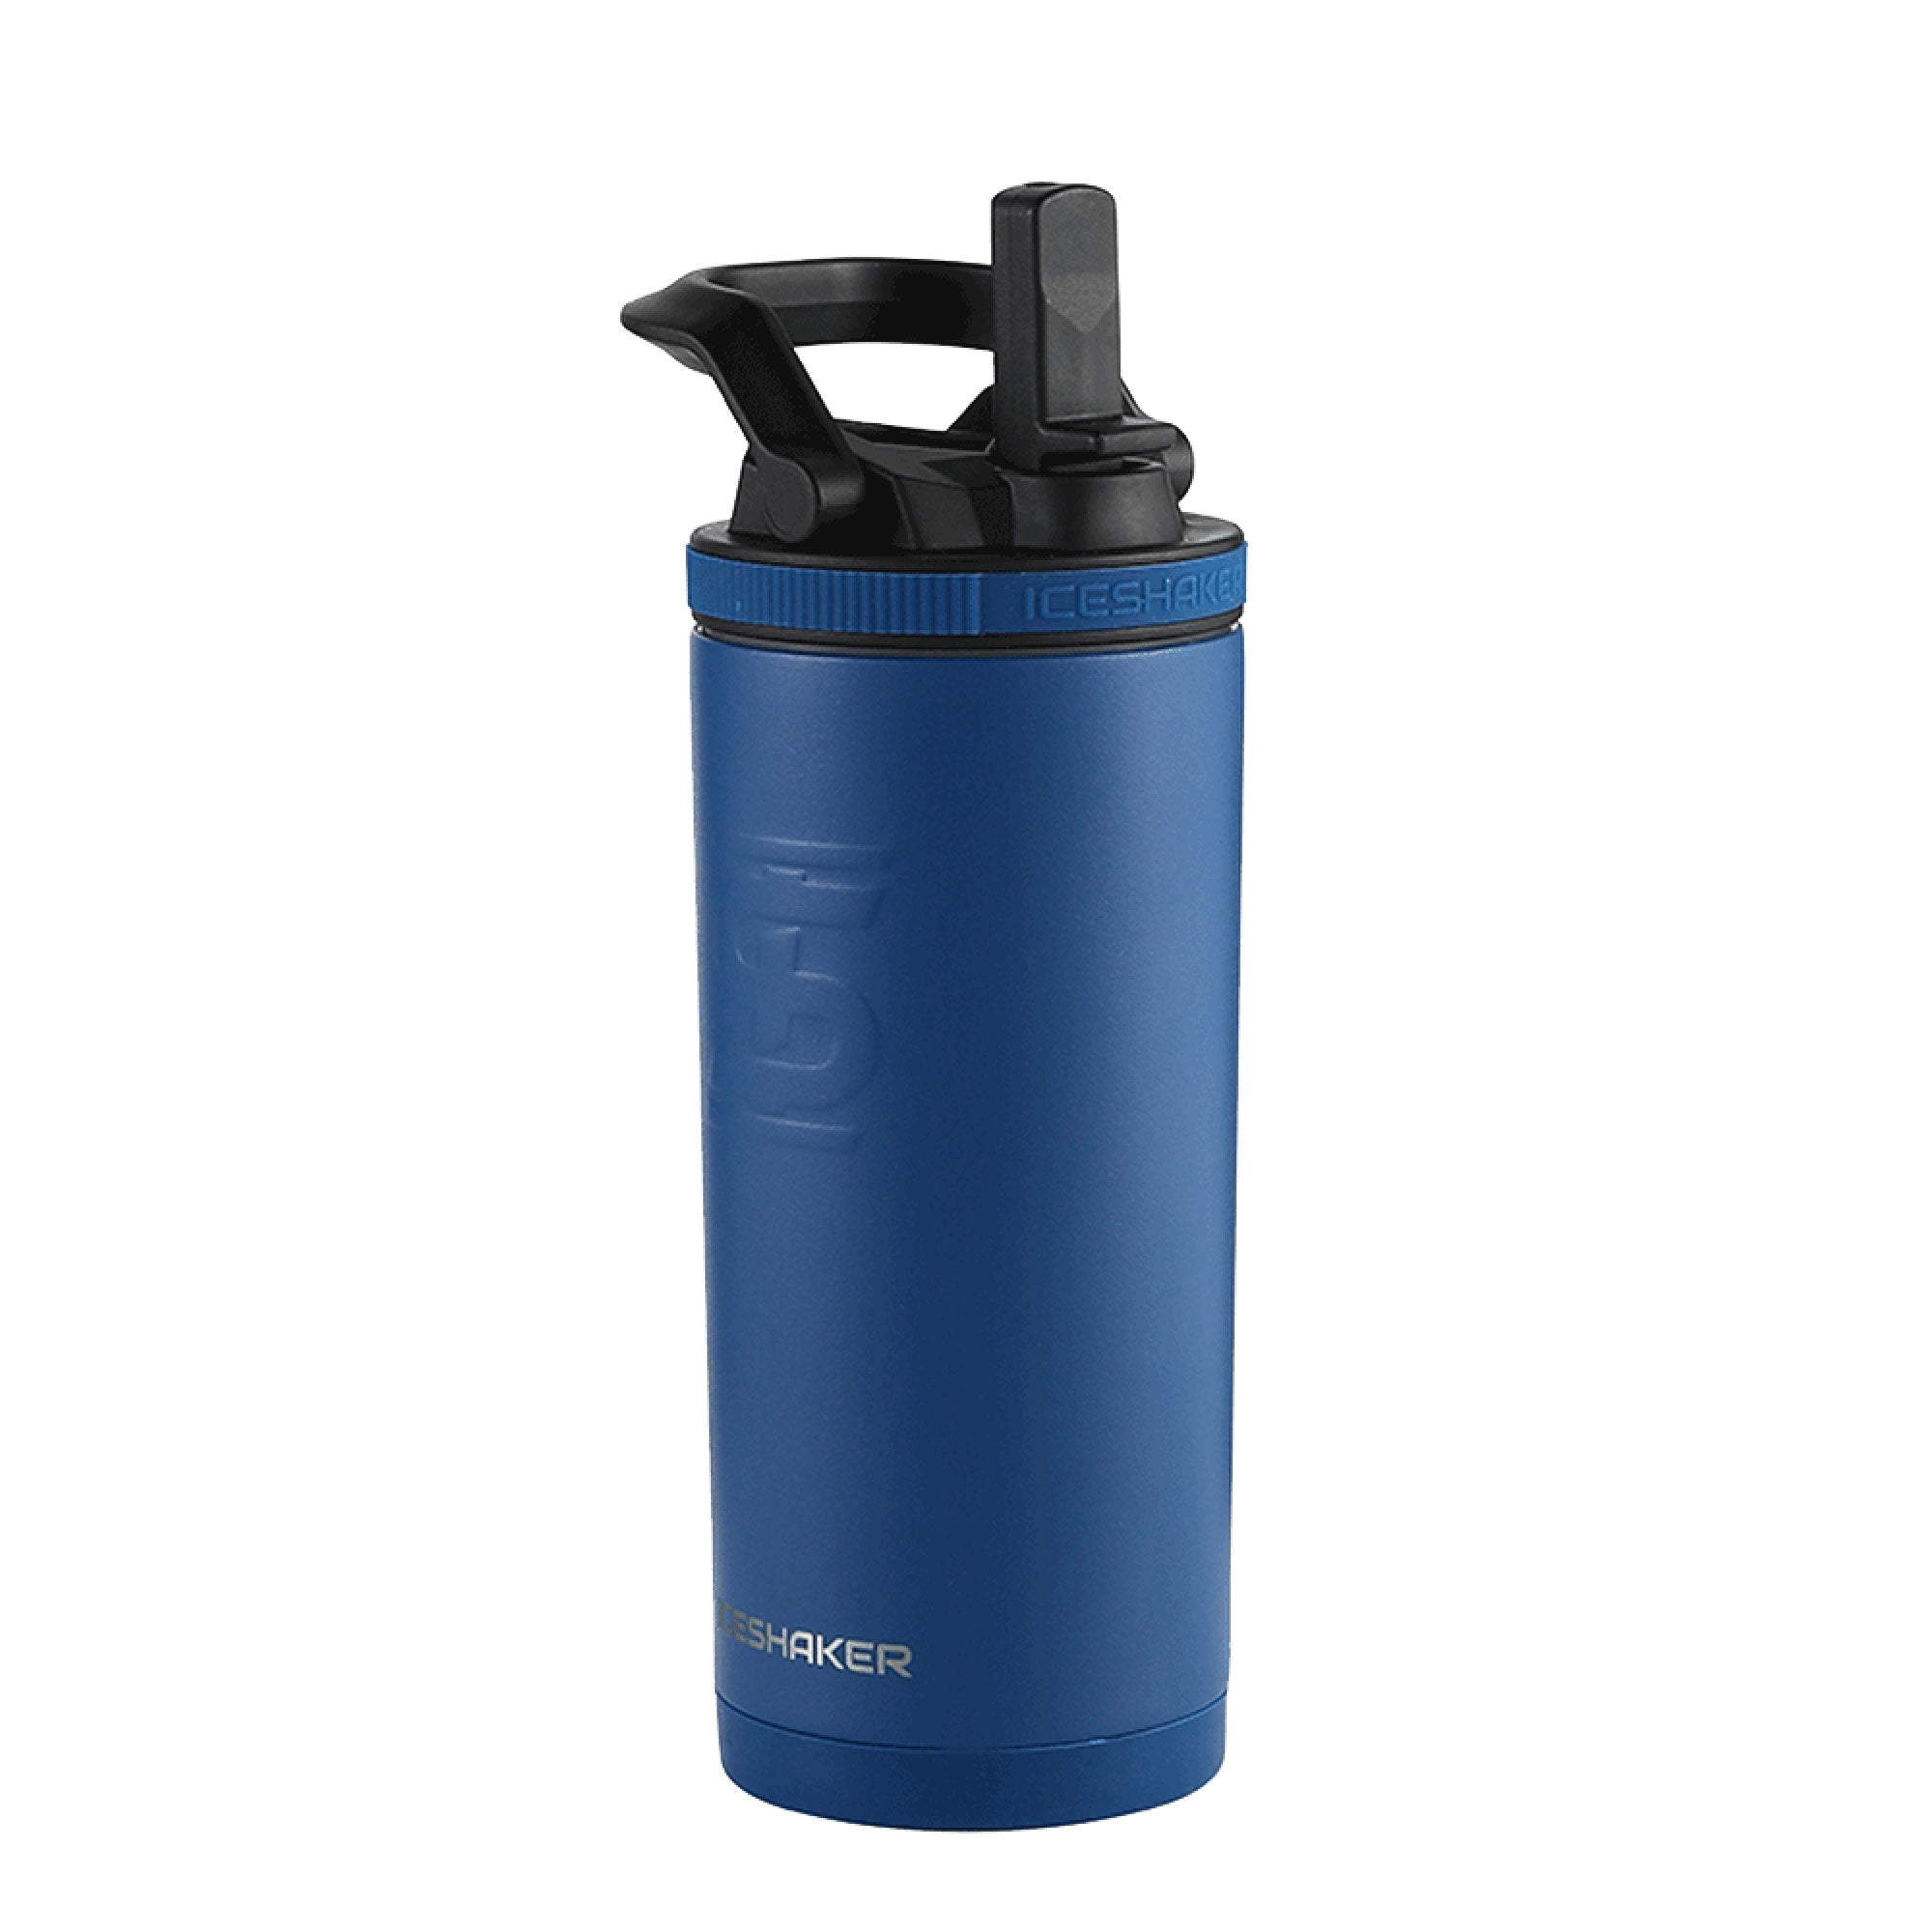  Sport Bottle with Push Pull Lid - 20 oz. - Colors 10510-C